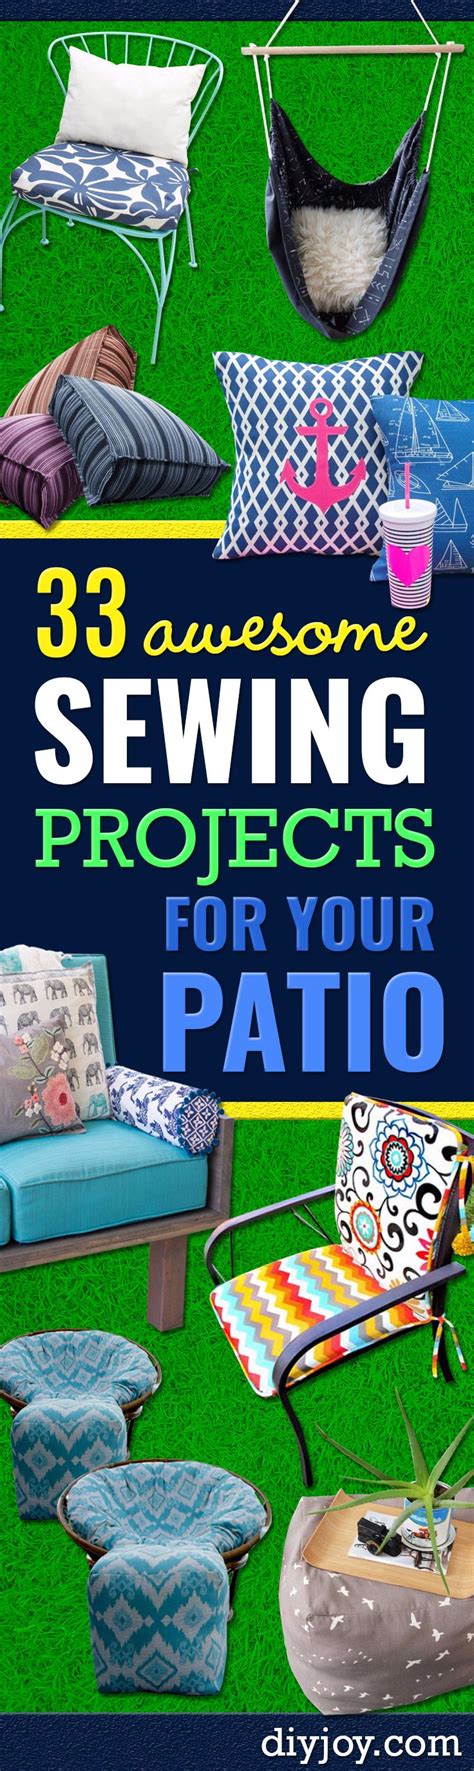 Sewing Projects For The Patio Step By Step Instructions And Free